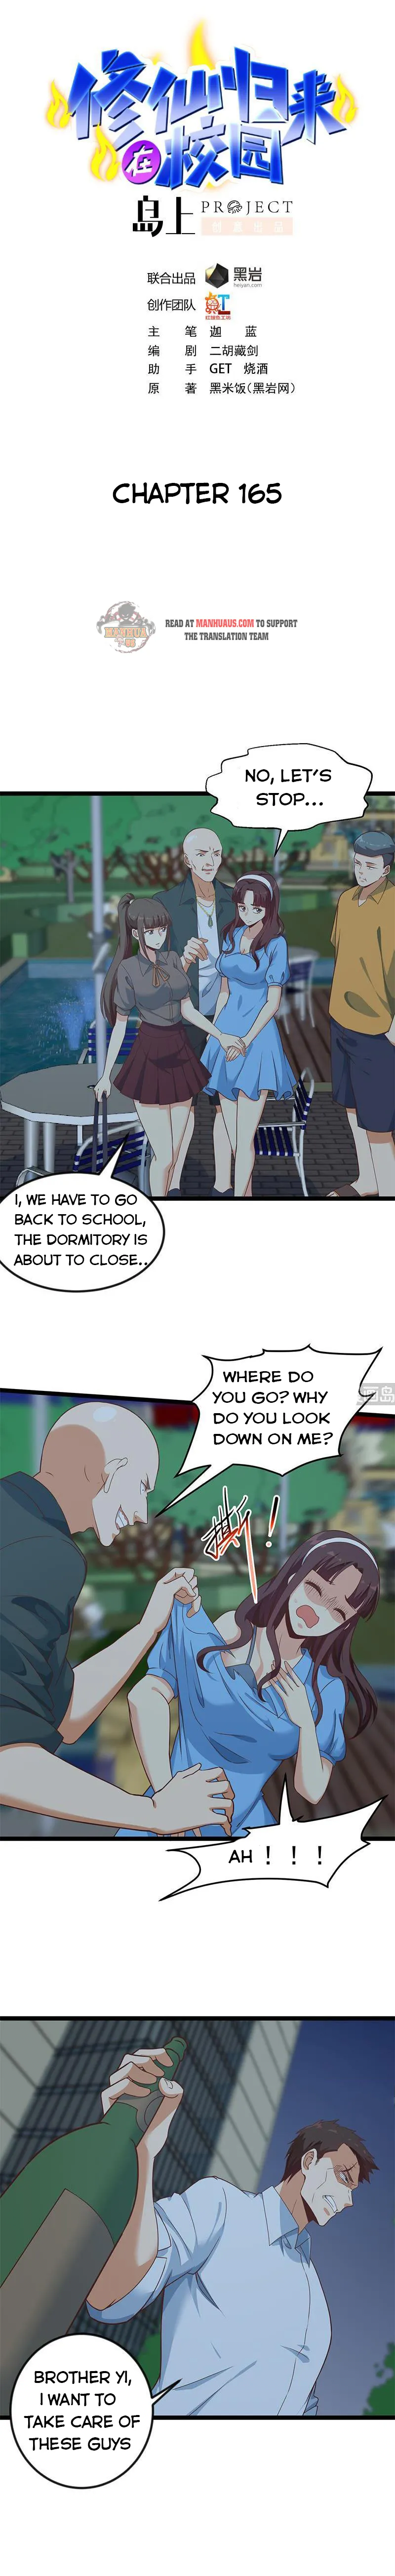 Cultivation Return on Campus Chapter 165 page 1